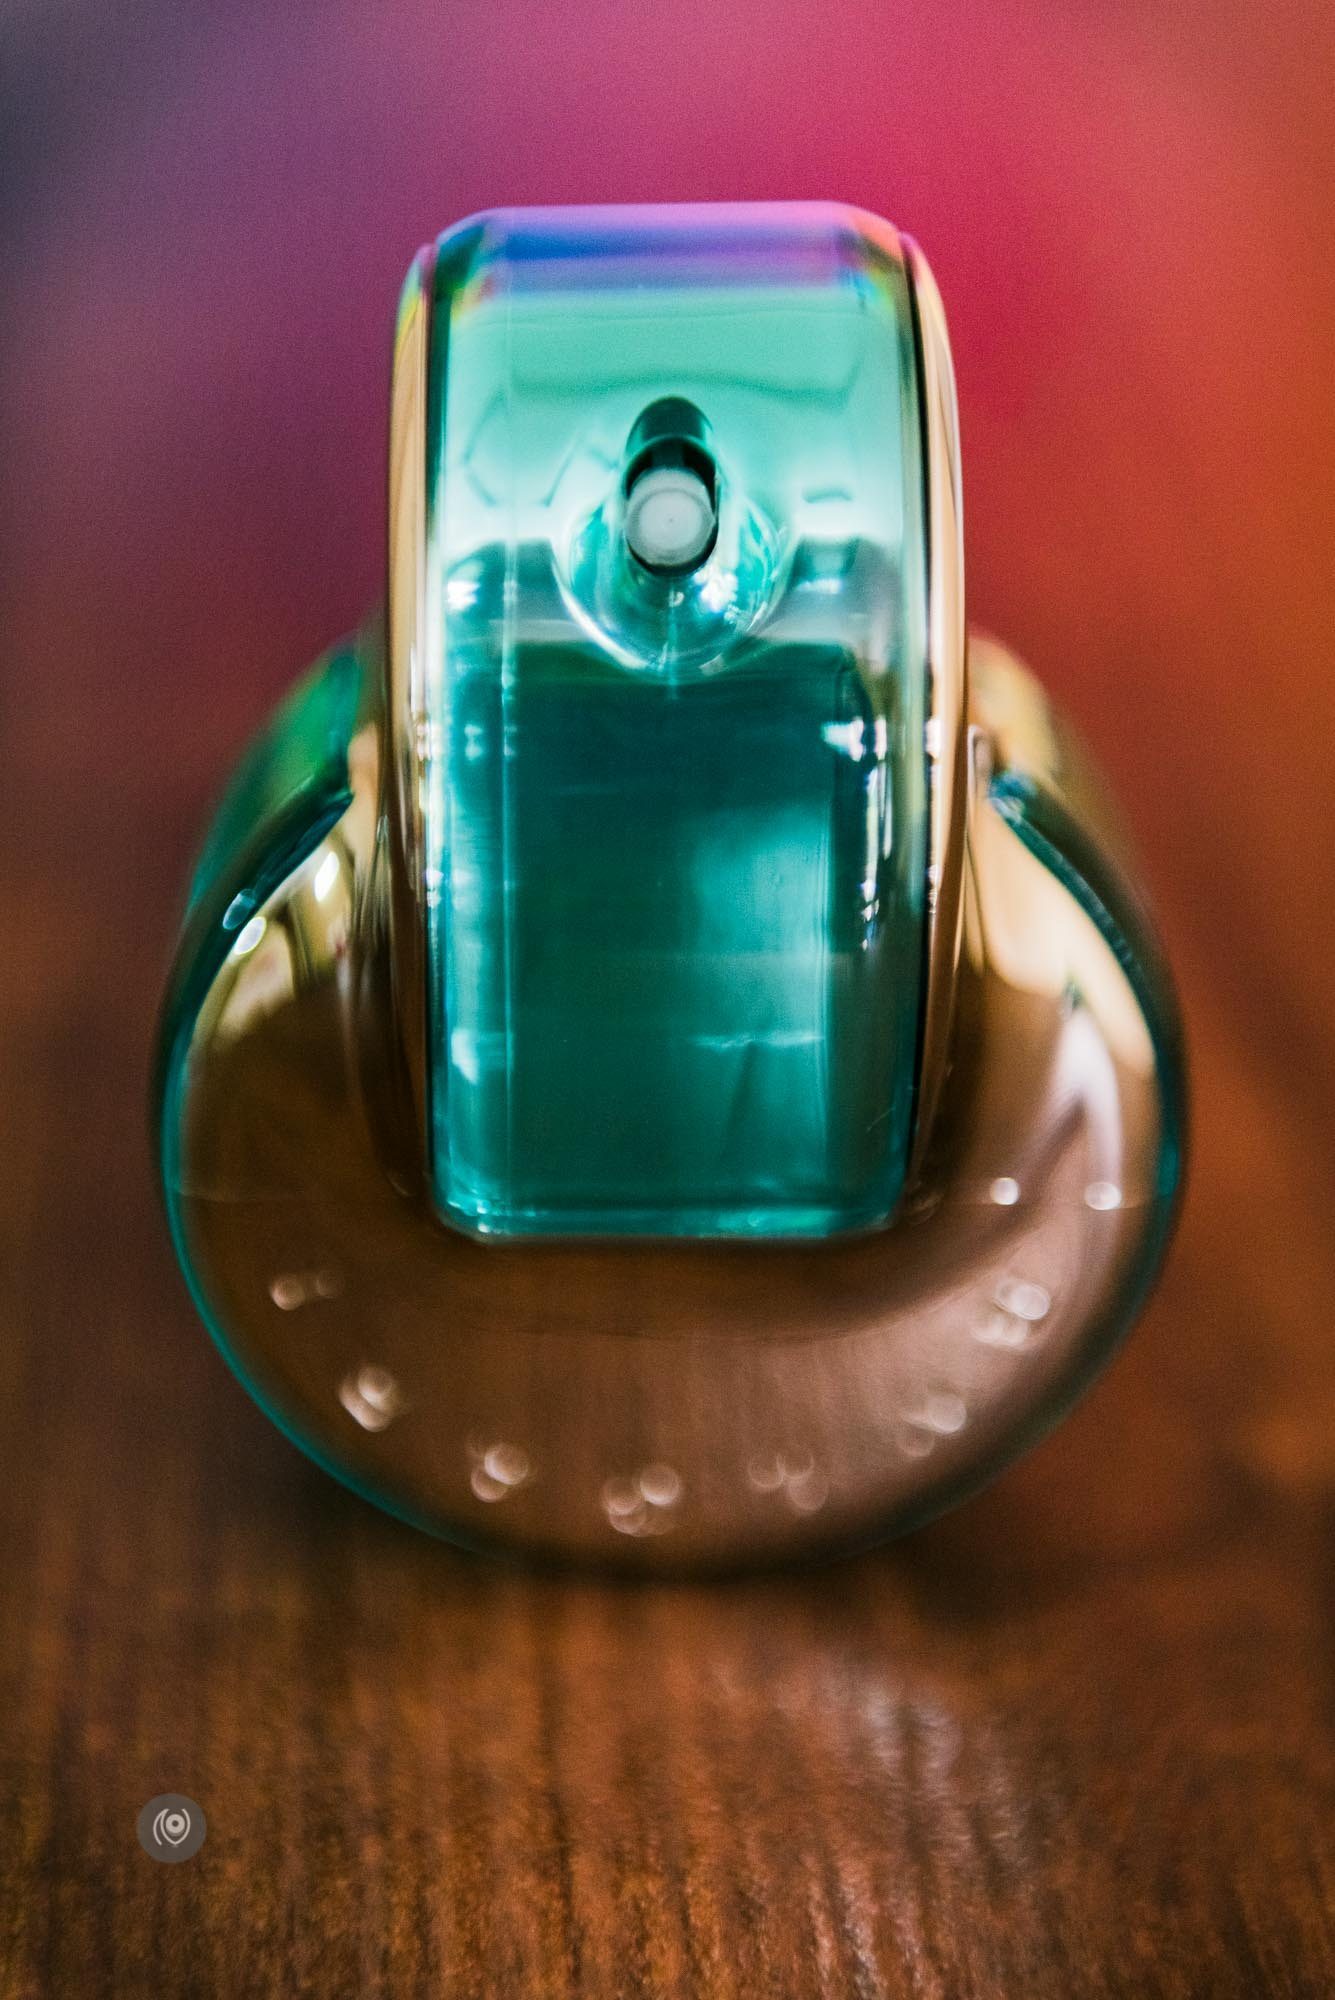 Omnia Paraiba by Bvlgari, Omnia, Paraiba, Bvlgari, Bulgari, Turquoise, Tourmaline, Fragrance Of The Month, #FragranceOfTheMonth, Naina.co, Luxury Photographer, Lifestyle Photographer, Luxury Blogger, Lifestyle Blogger, Experience Collector, #EyesForLuxury